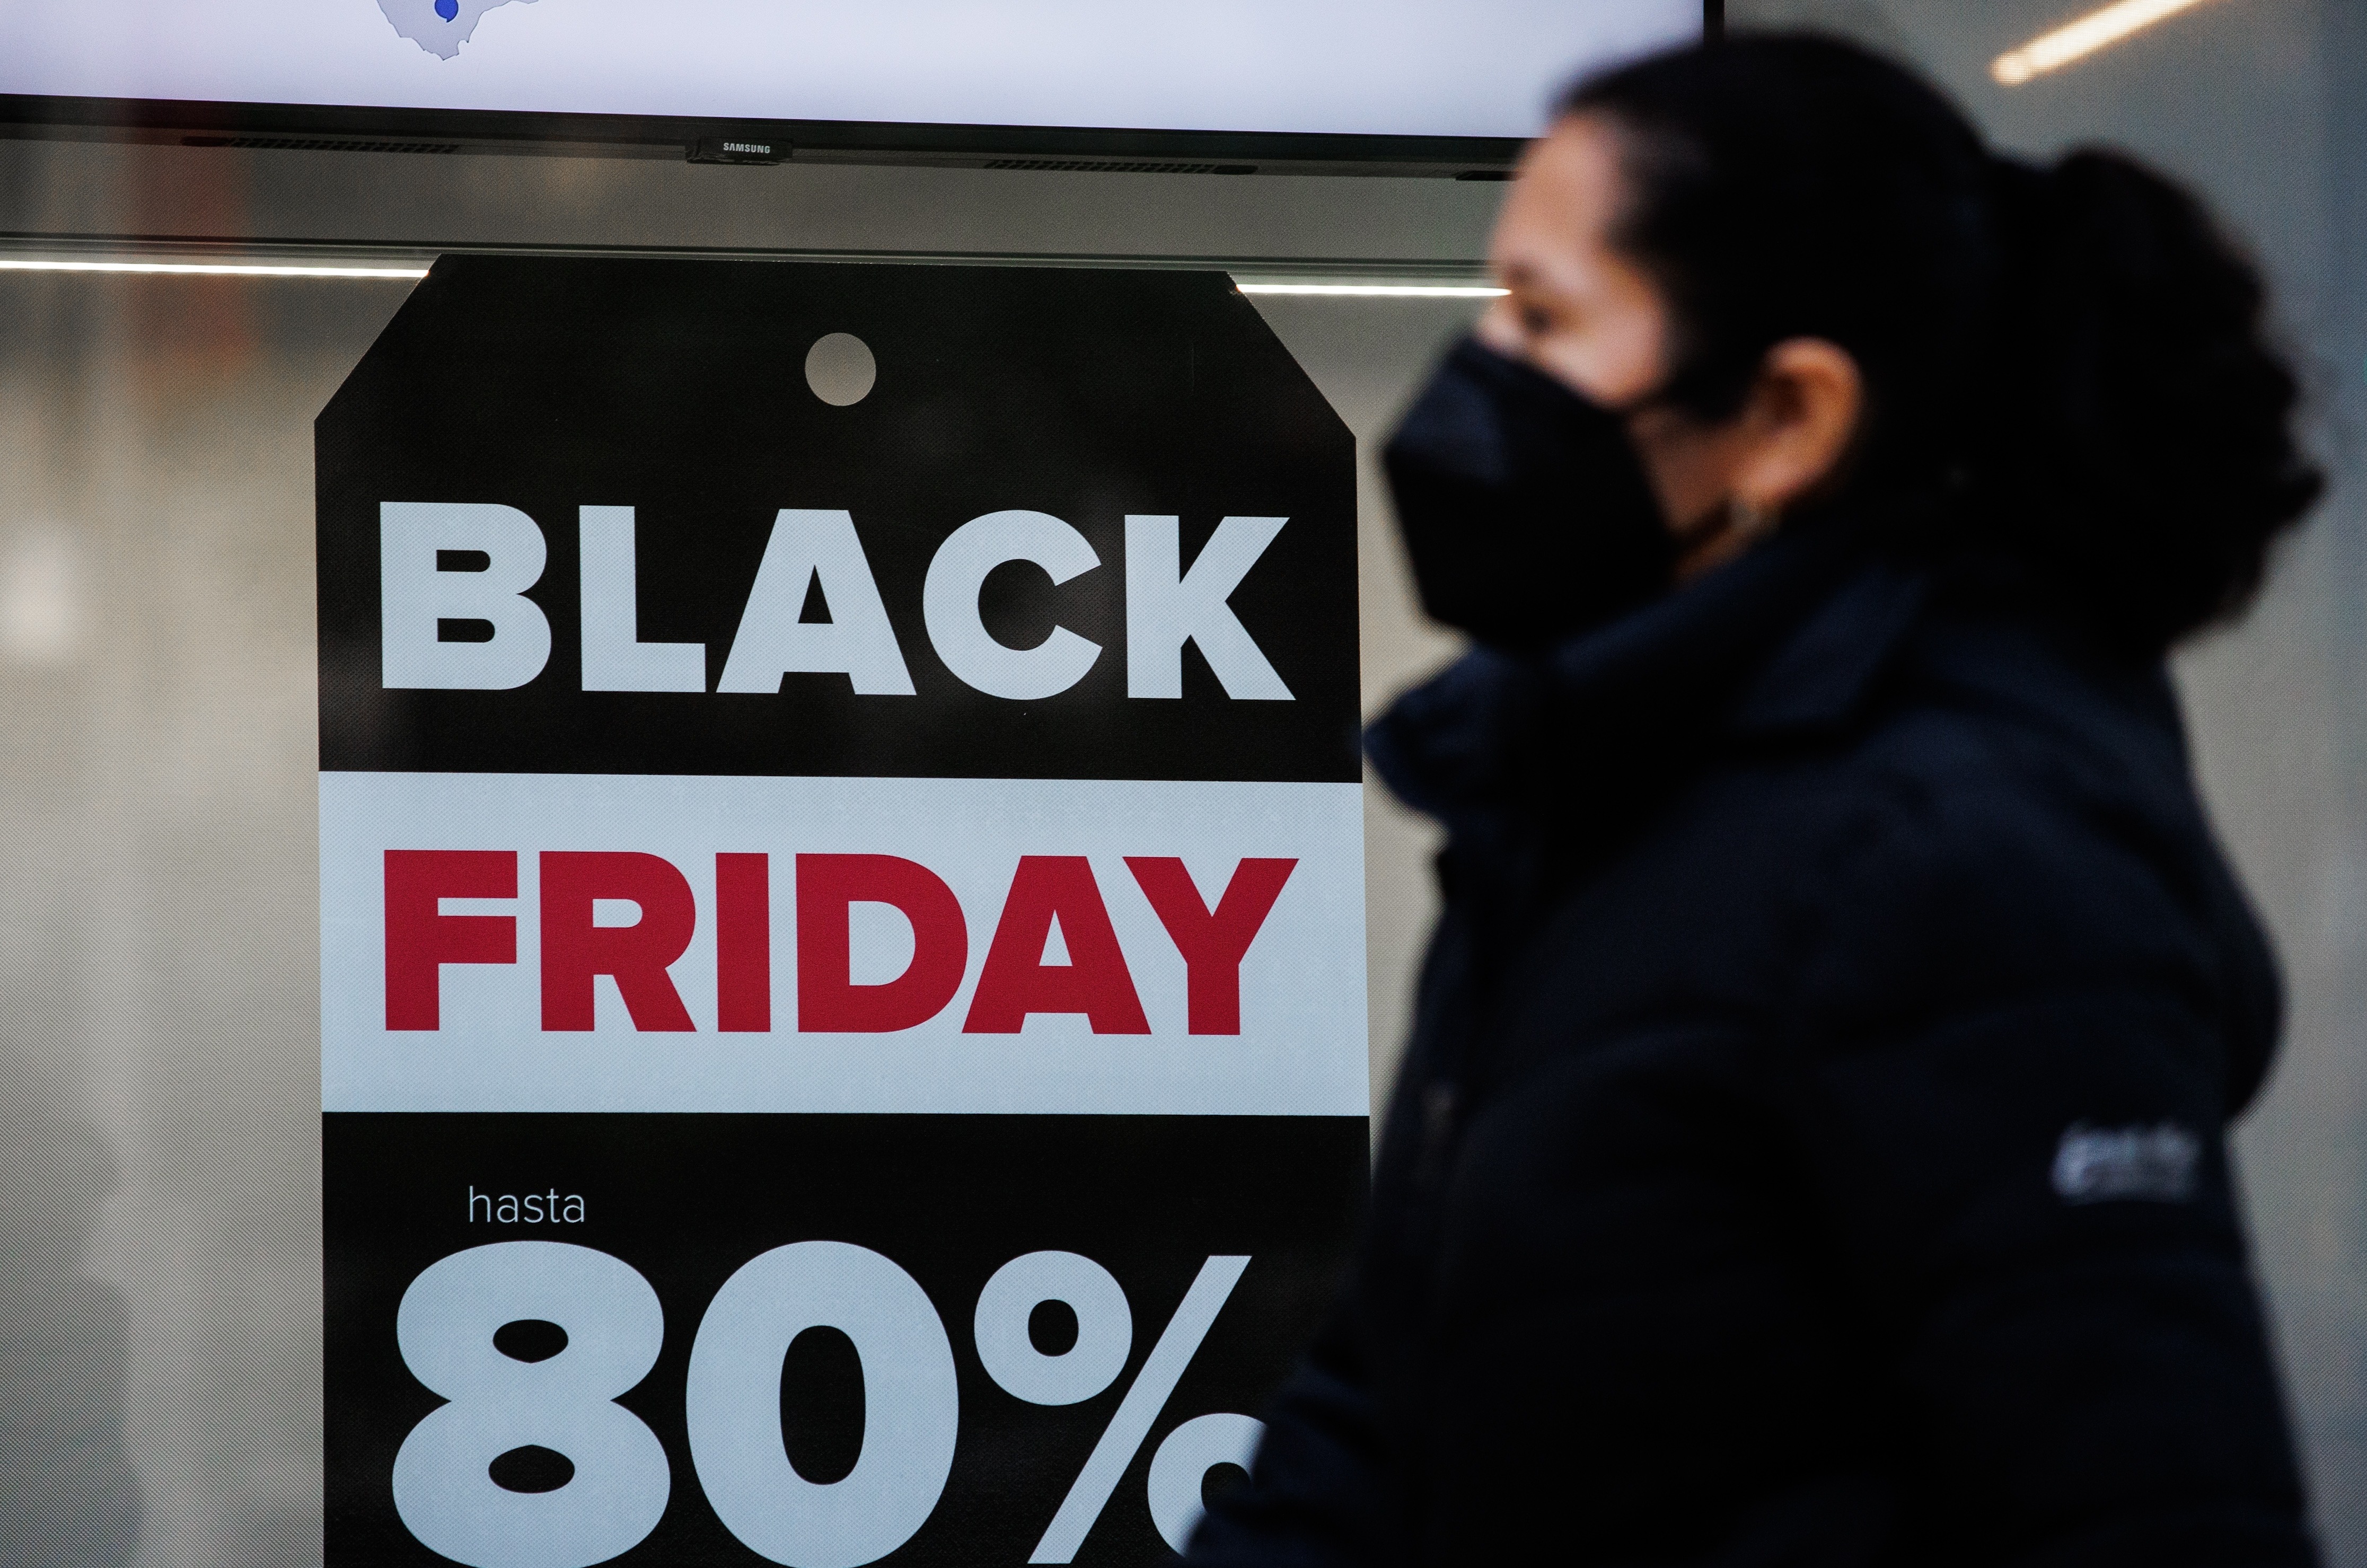 Black Friday deals launch at different times depending on the shop